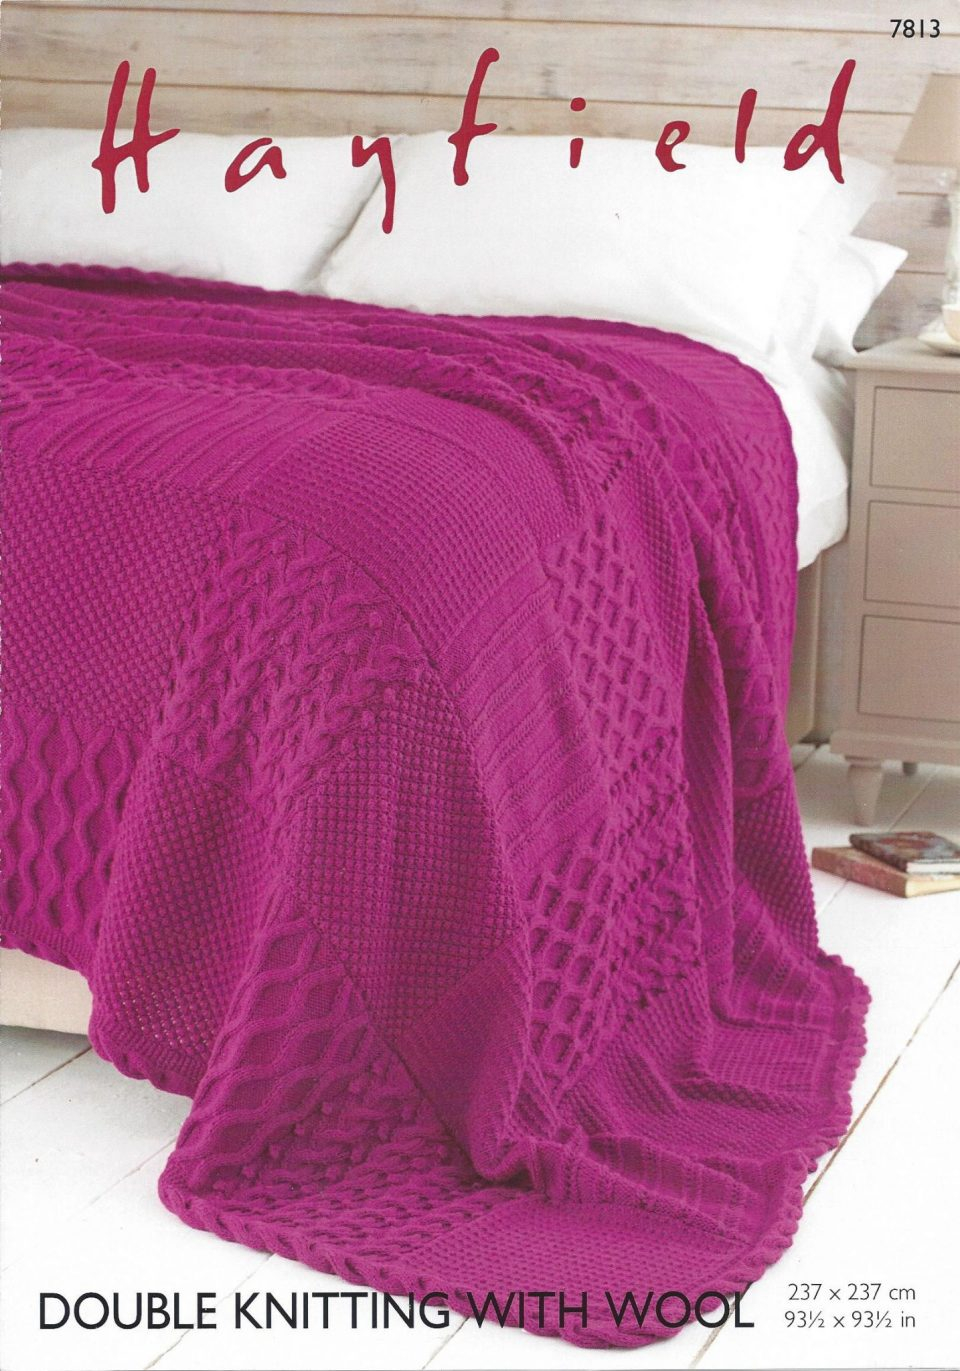 Free Easy Knitting Patterns Hayfield With Wool Throw Knitting Pattern Patterns For Throws Free